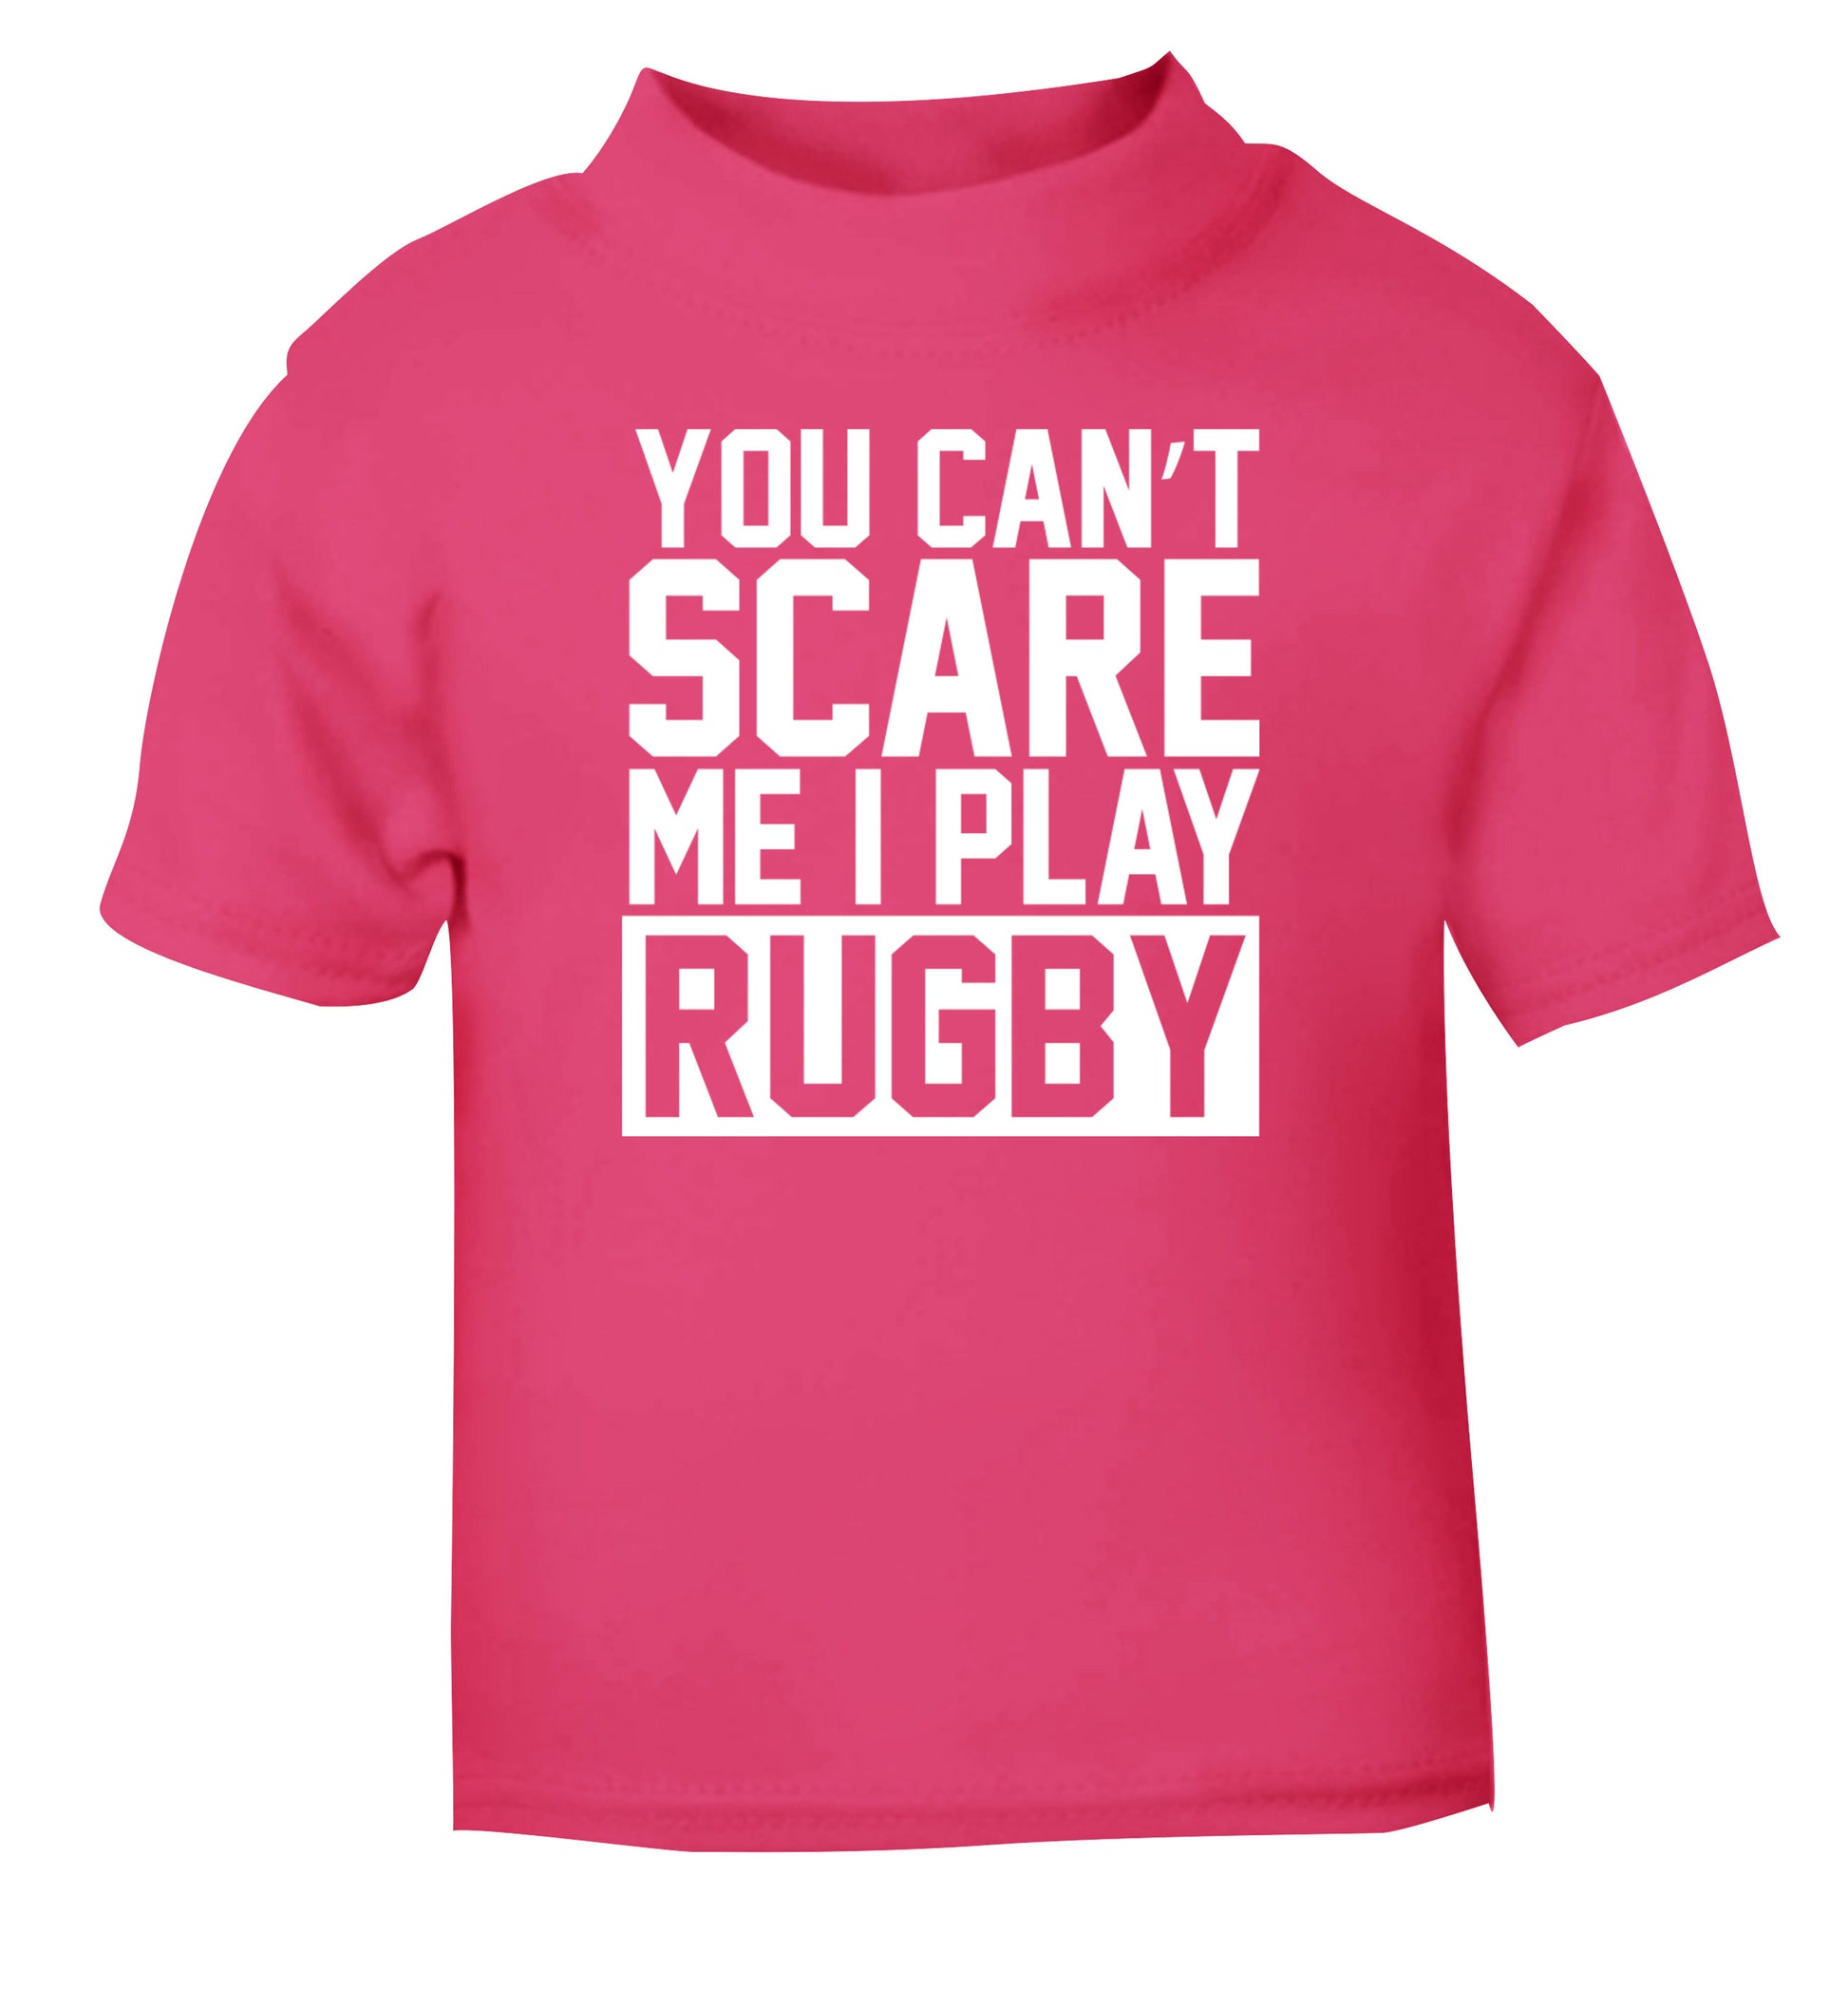 You can't scare me I play rugby pink Baby Toddler Tshirt 2 Years